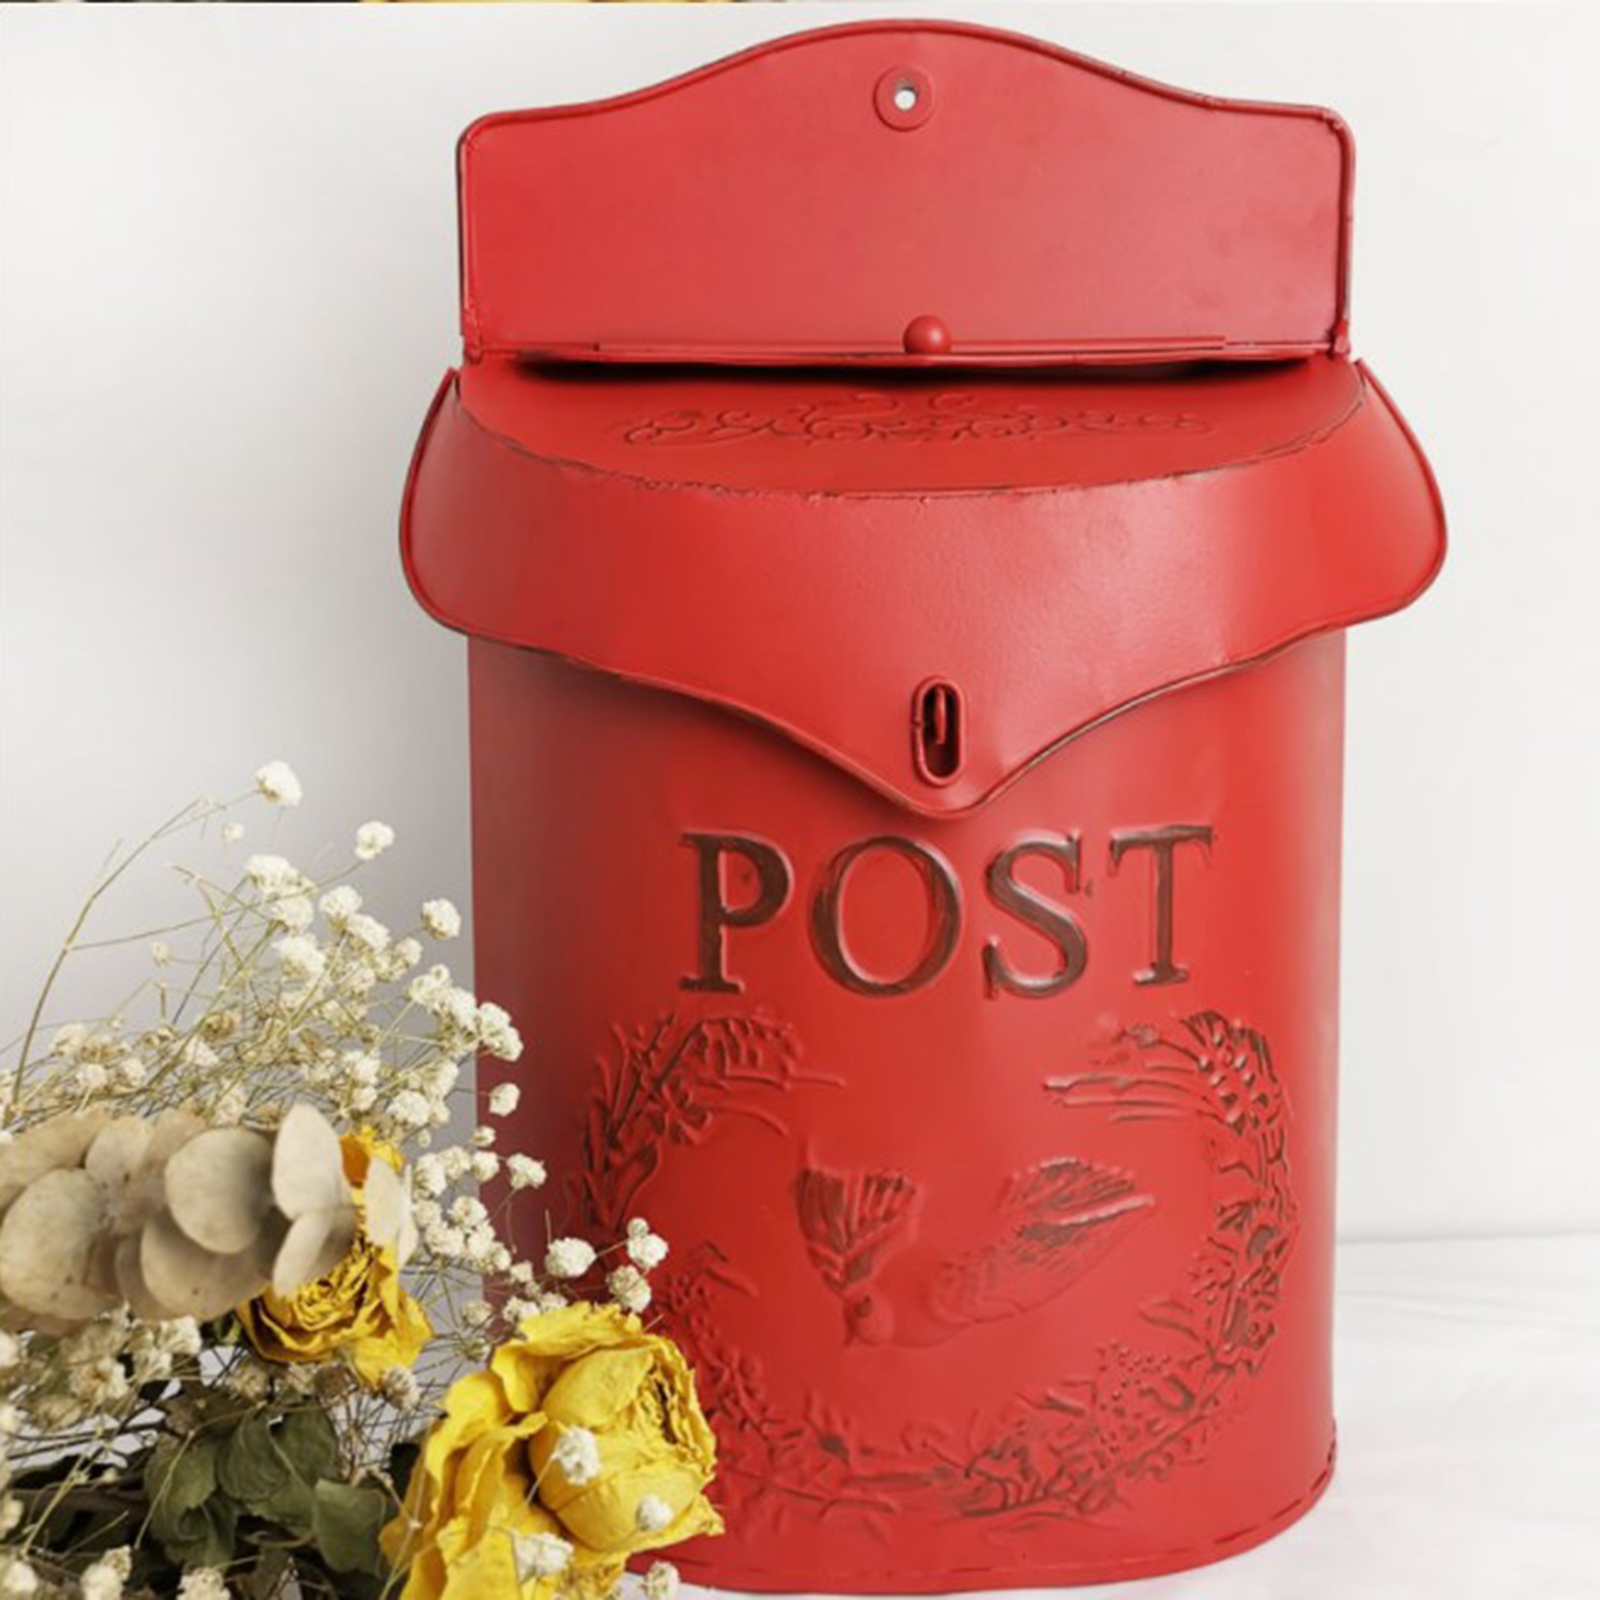 

Garden Decorations European Retro Style Old Sealed Opinion spaper Letter Box Metal Wall Hanging Creative Lockable Mailbox Cafe Home Decoration 221020